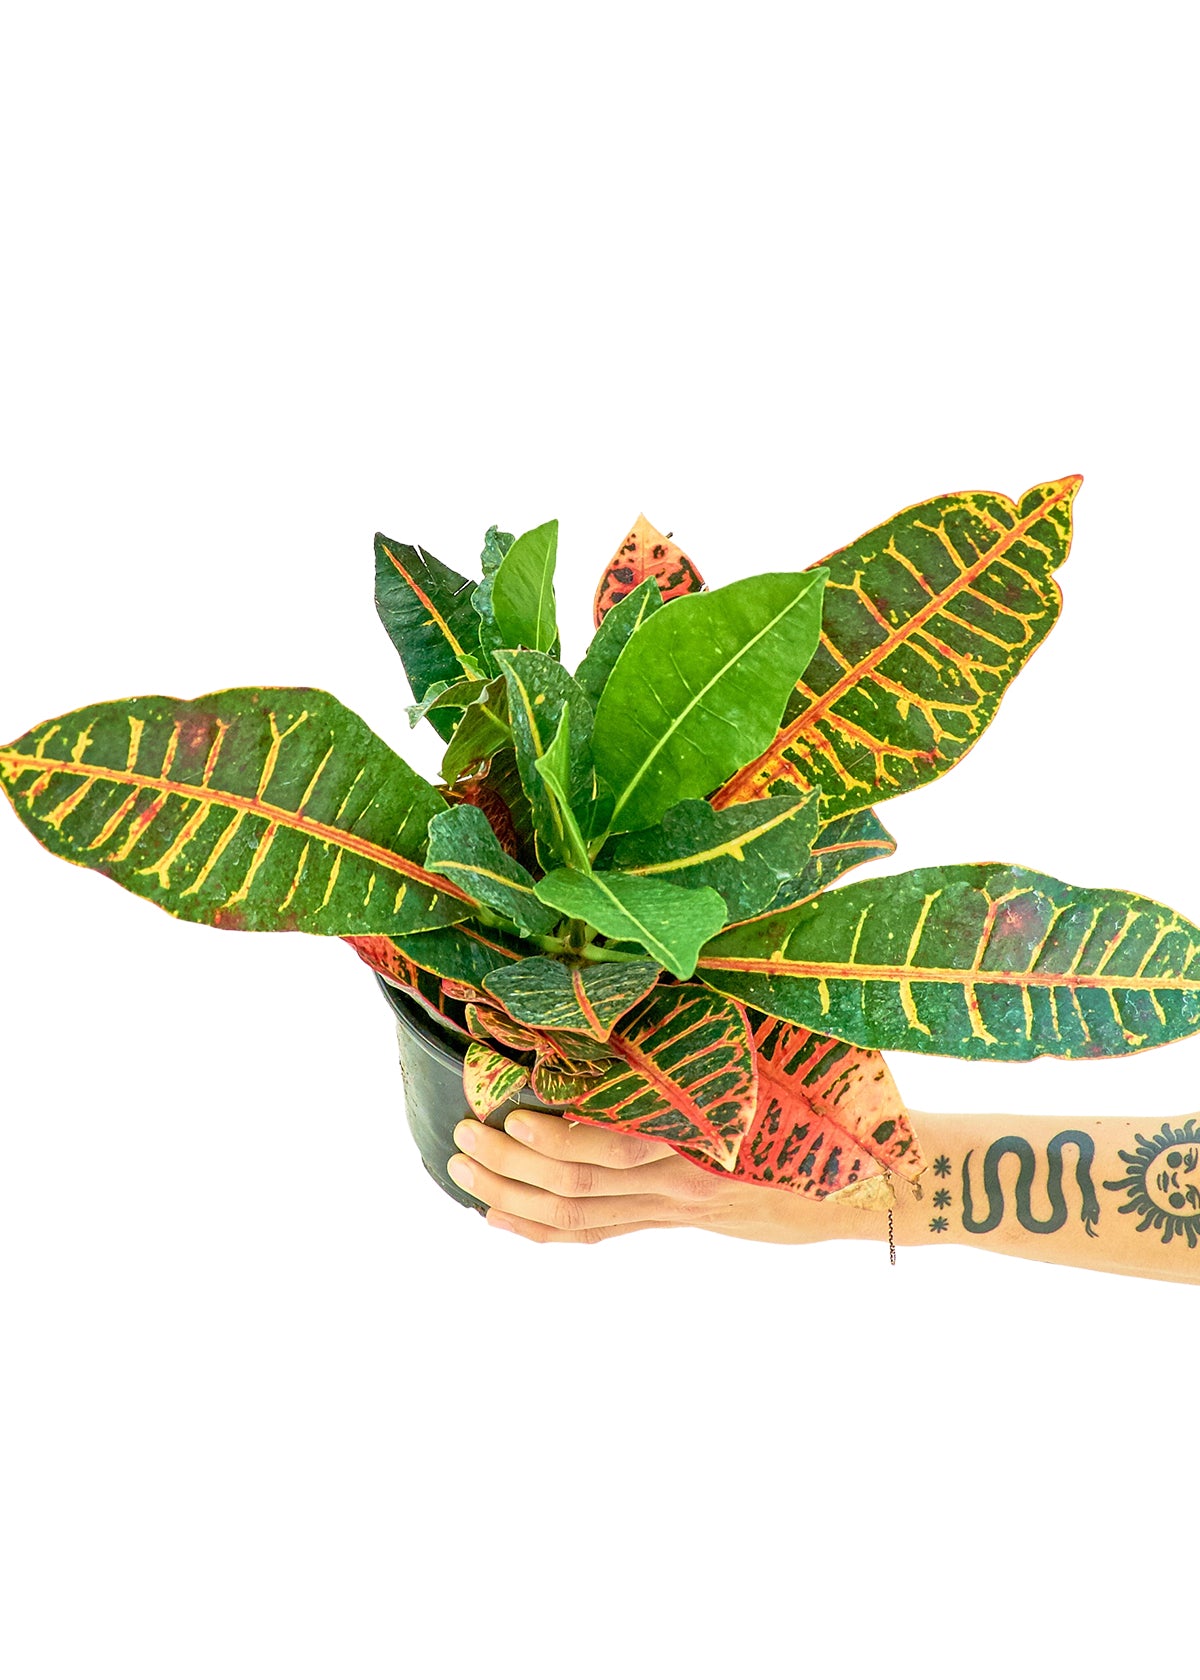 Medium size Croton Petra plant in a growers pots with a white background with a hand holding the pot to show the top view